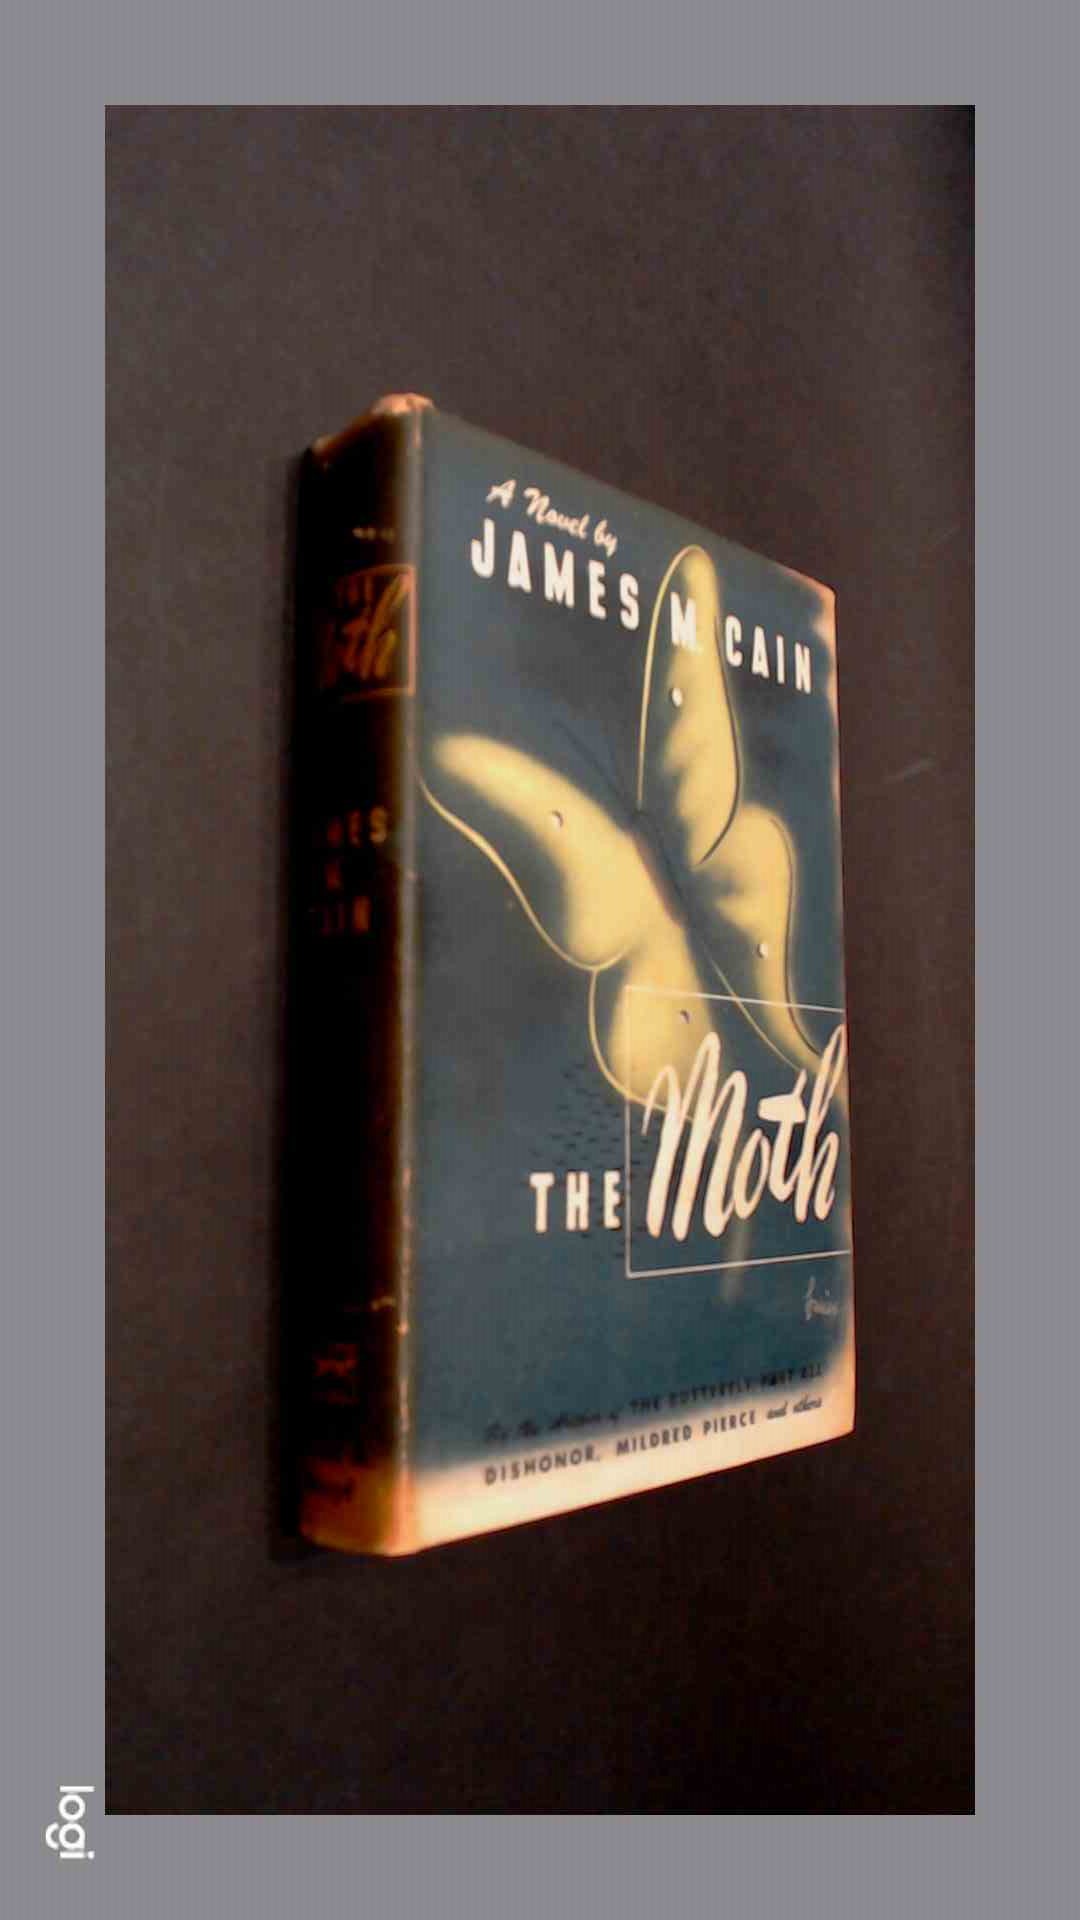 CAIN, JAMES M. - The moth